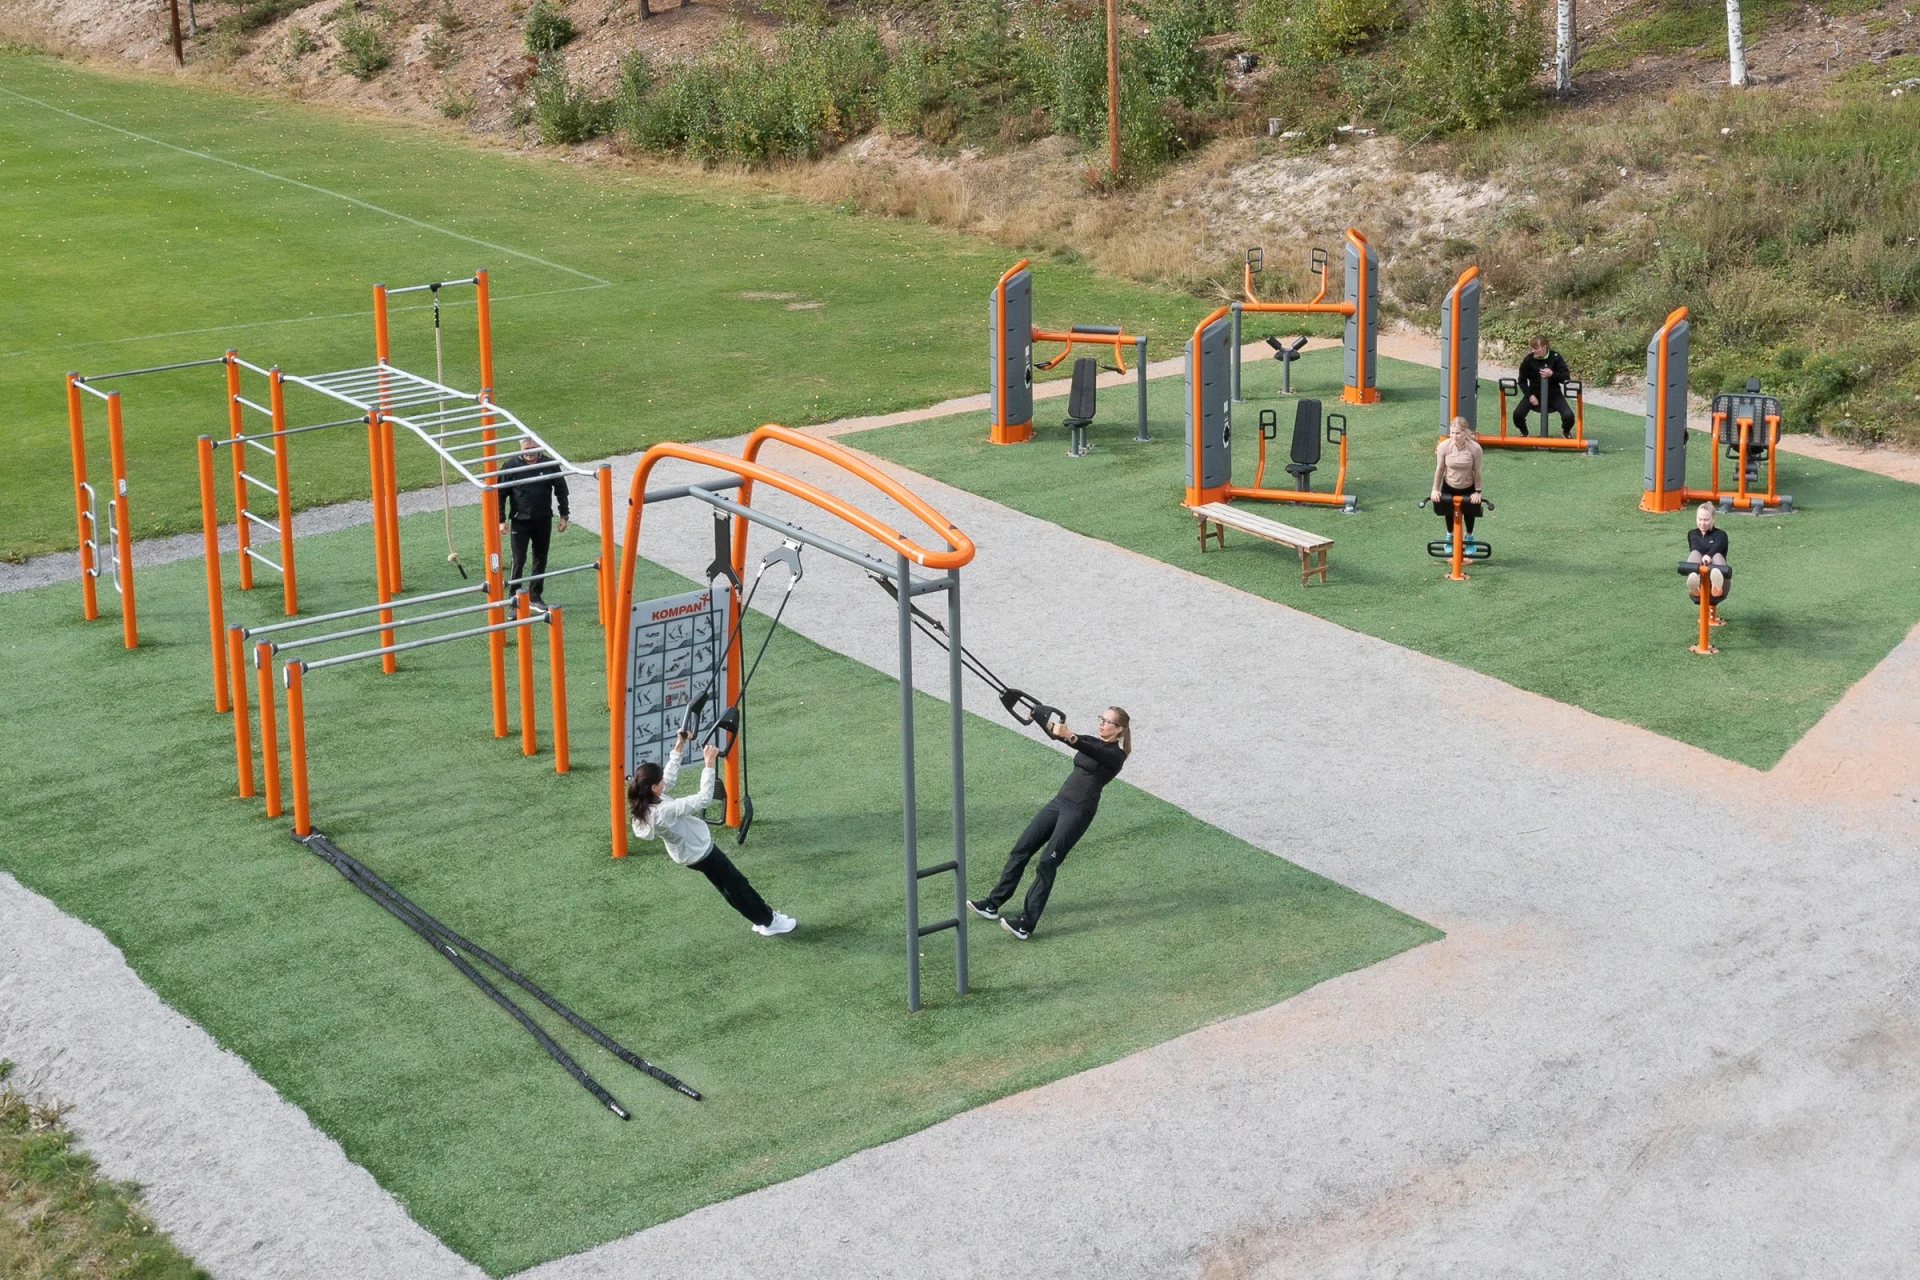 Concept designs for an outdoor fitness site with strength and circuit equipment